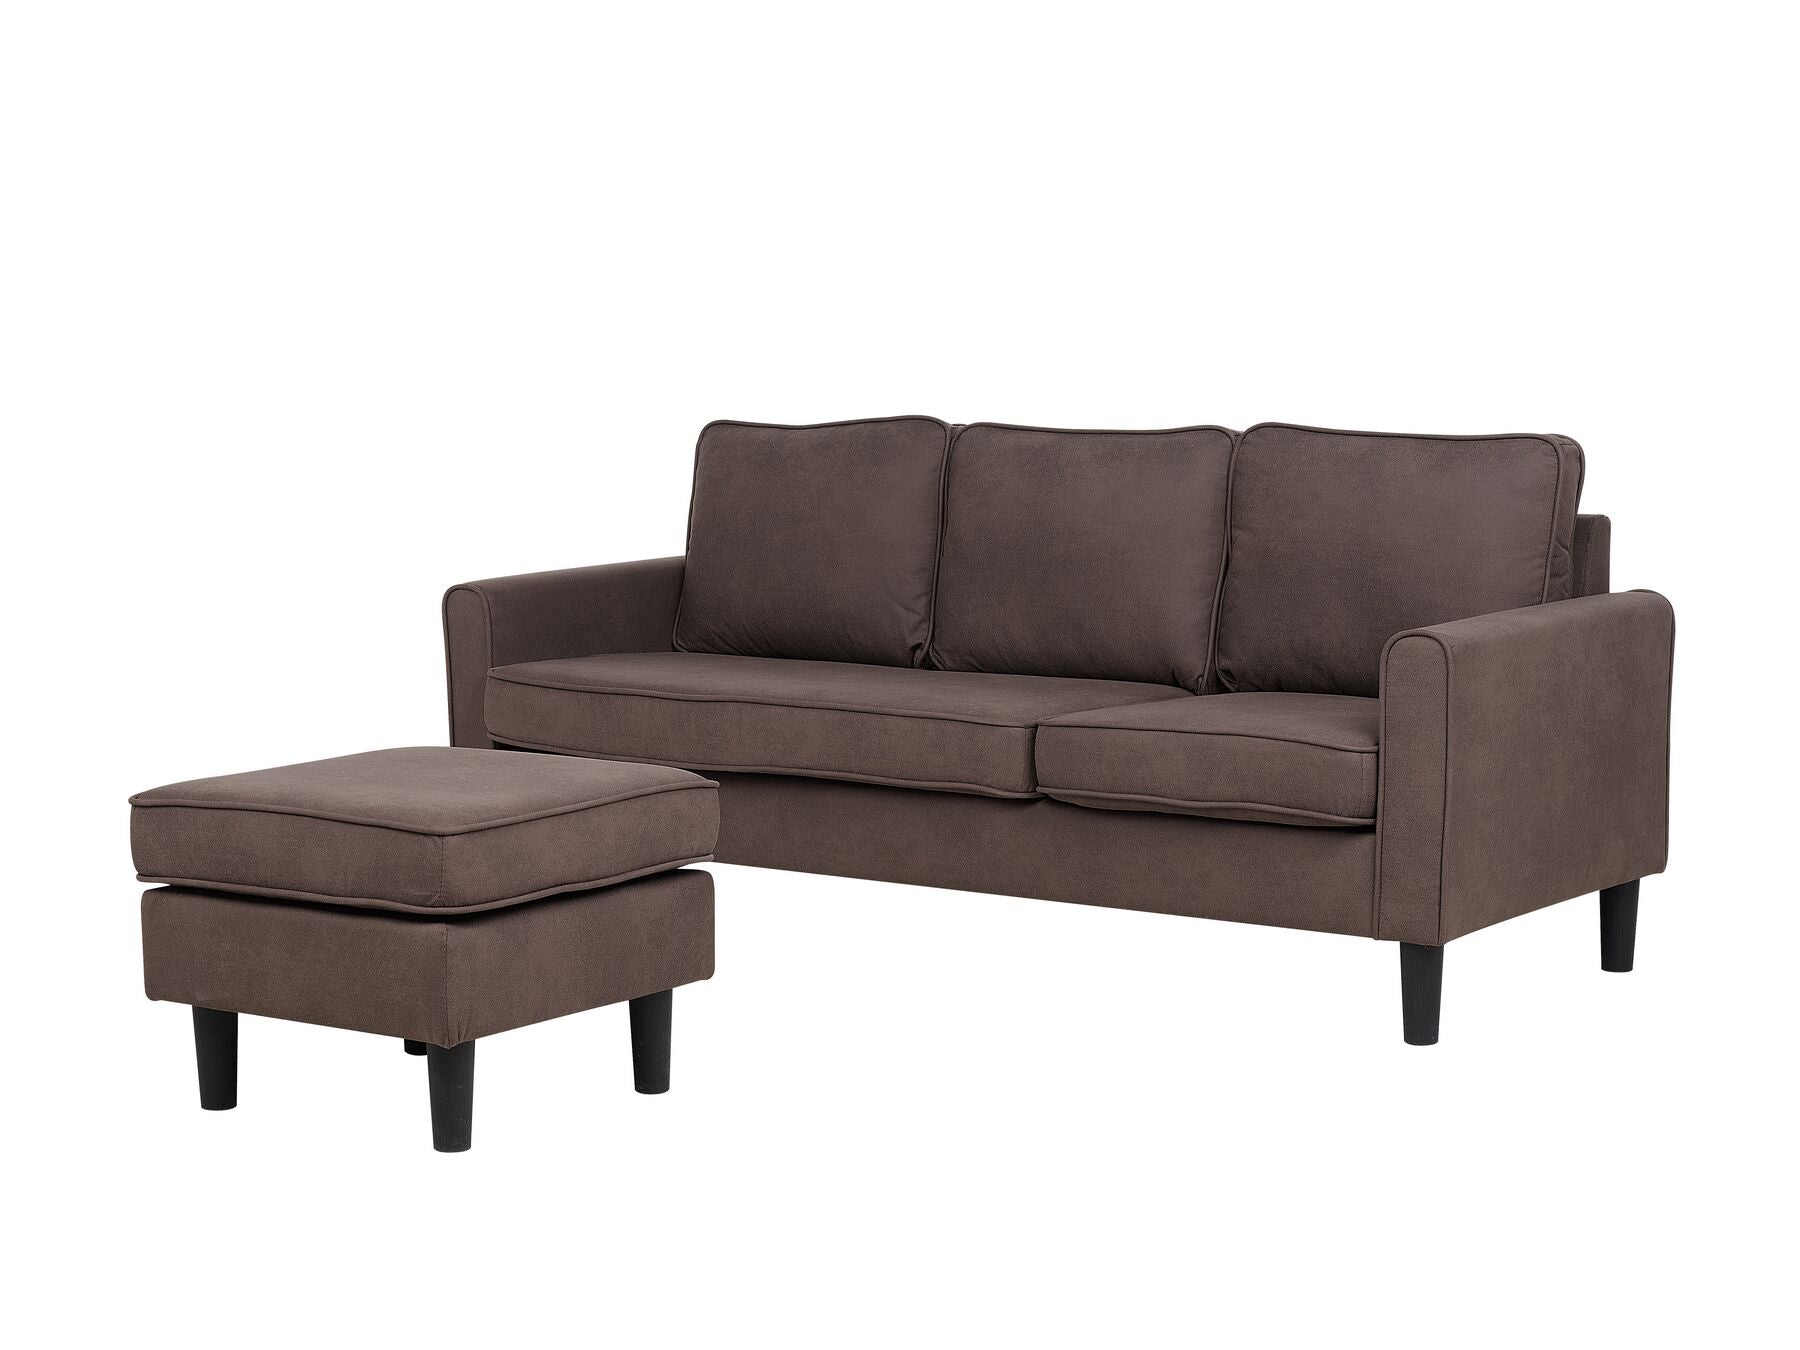 Avesta 3 Seater Fabric Sofa with Ottoman (Brown)